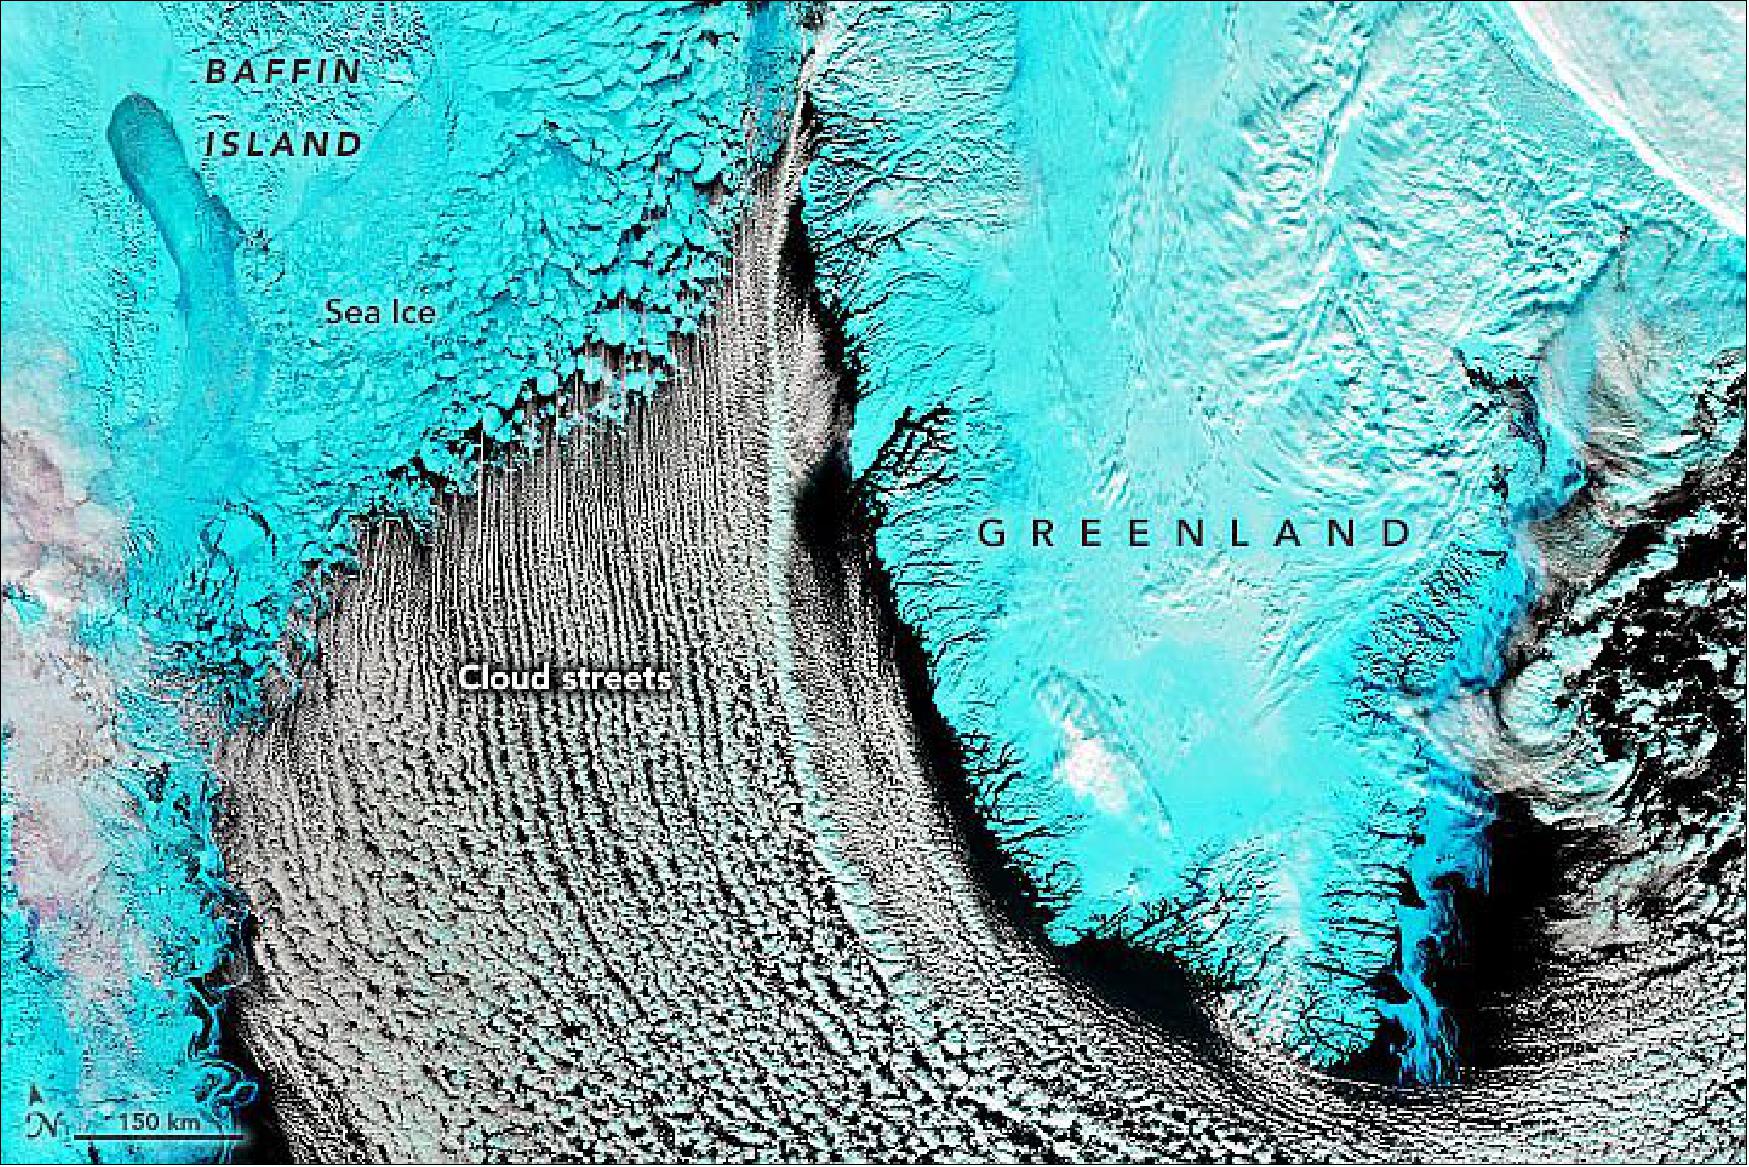 Figure 22: As sea ice in far northern latitudes approached its annual maximum extent, the Visible Infrared Imaging Radiometer Suite (VIIRS) on the Suomi NPP satellite acquired this false-color image of the Labrador Sea on March 2, 2020. Chunks of sea ice hugged the coast of Baffin Island, while cloud streets streamed over the sea (image credit: NASA Earth Observatory, image by Joshua Stevens, using VIIRS data from NASA EOSDIS/LANCE and GIBS/Worldview and the Suomi National Polar-orbiting Partnership. Text by Adam Voiland)